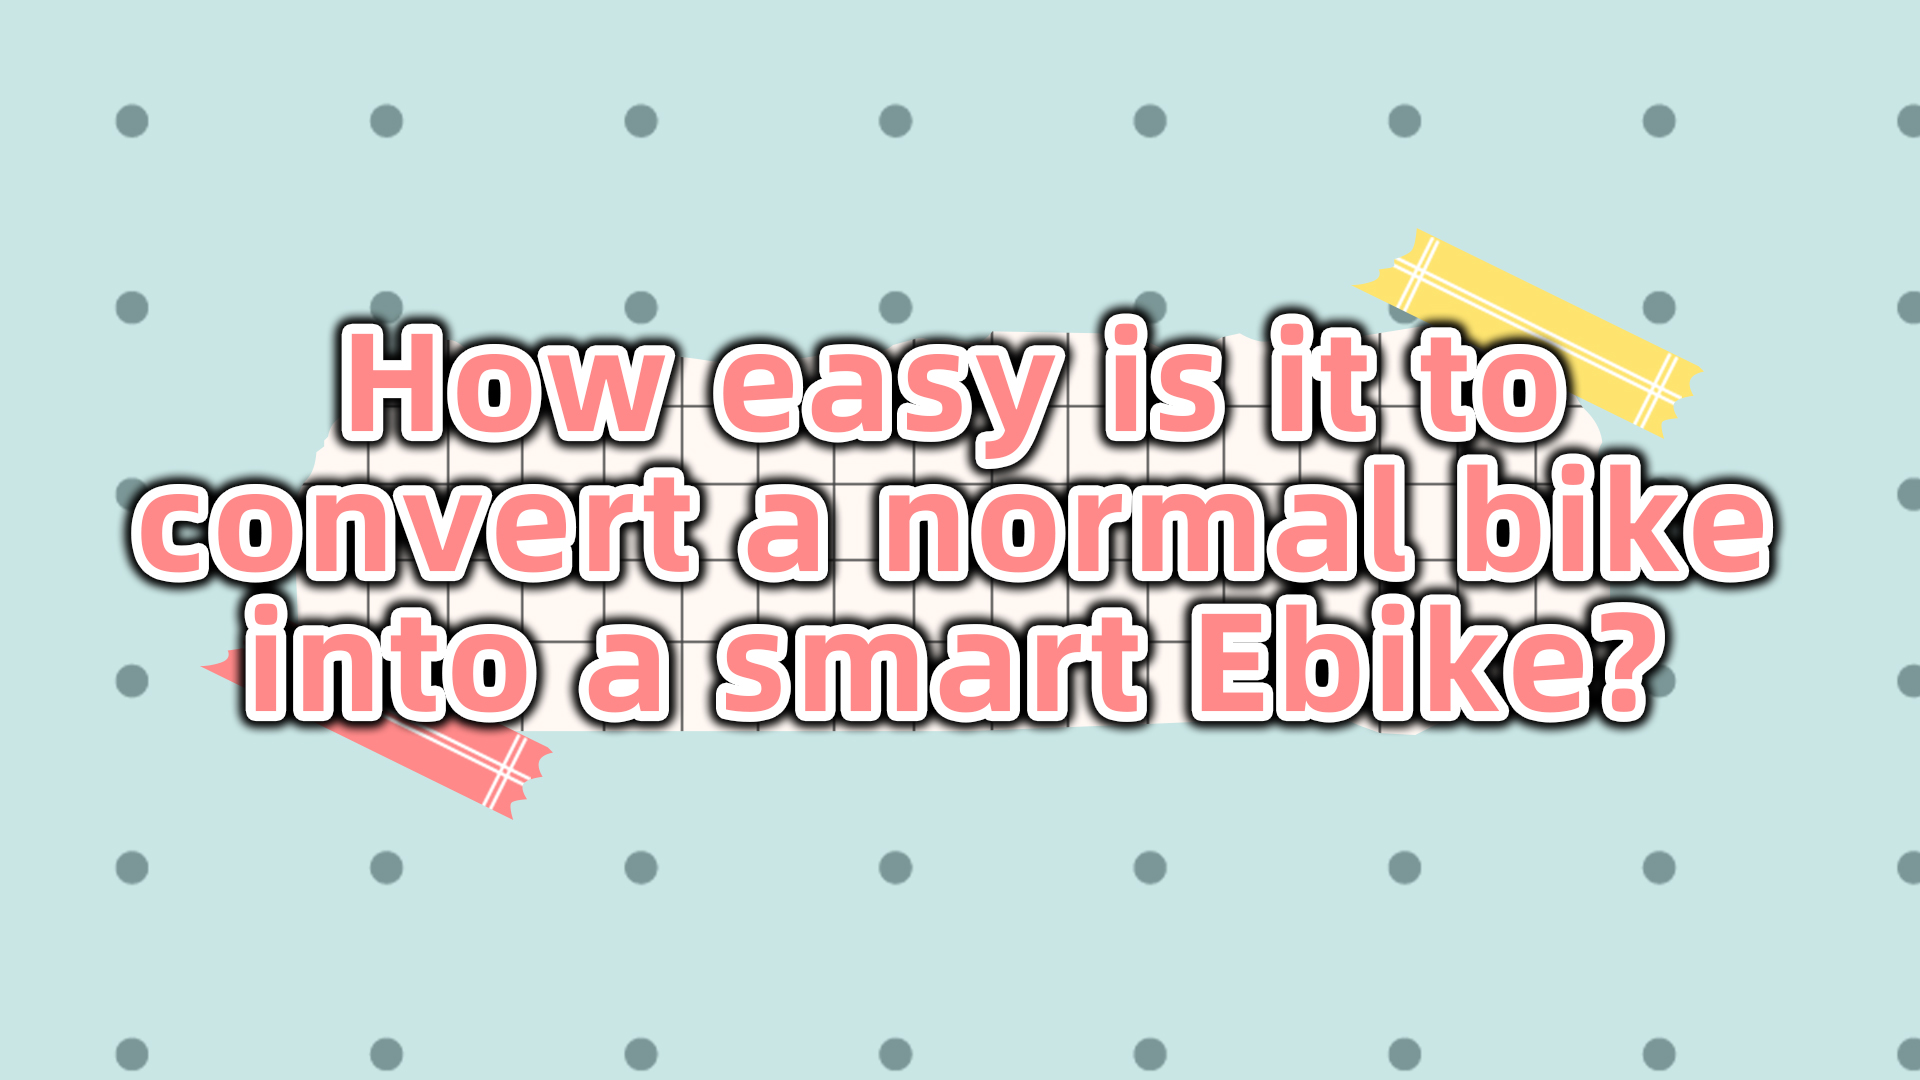 ALL-IN-ONE Ebike kit ‖ How easy is it to convert a normal bike into a smart Ebike?